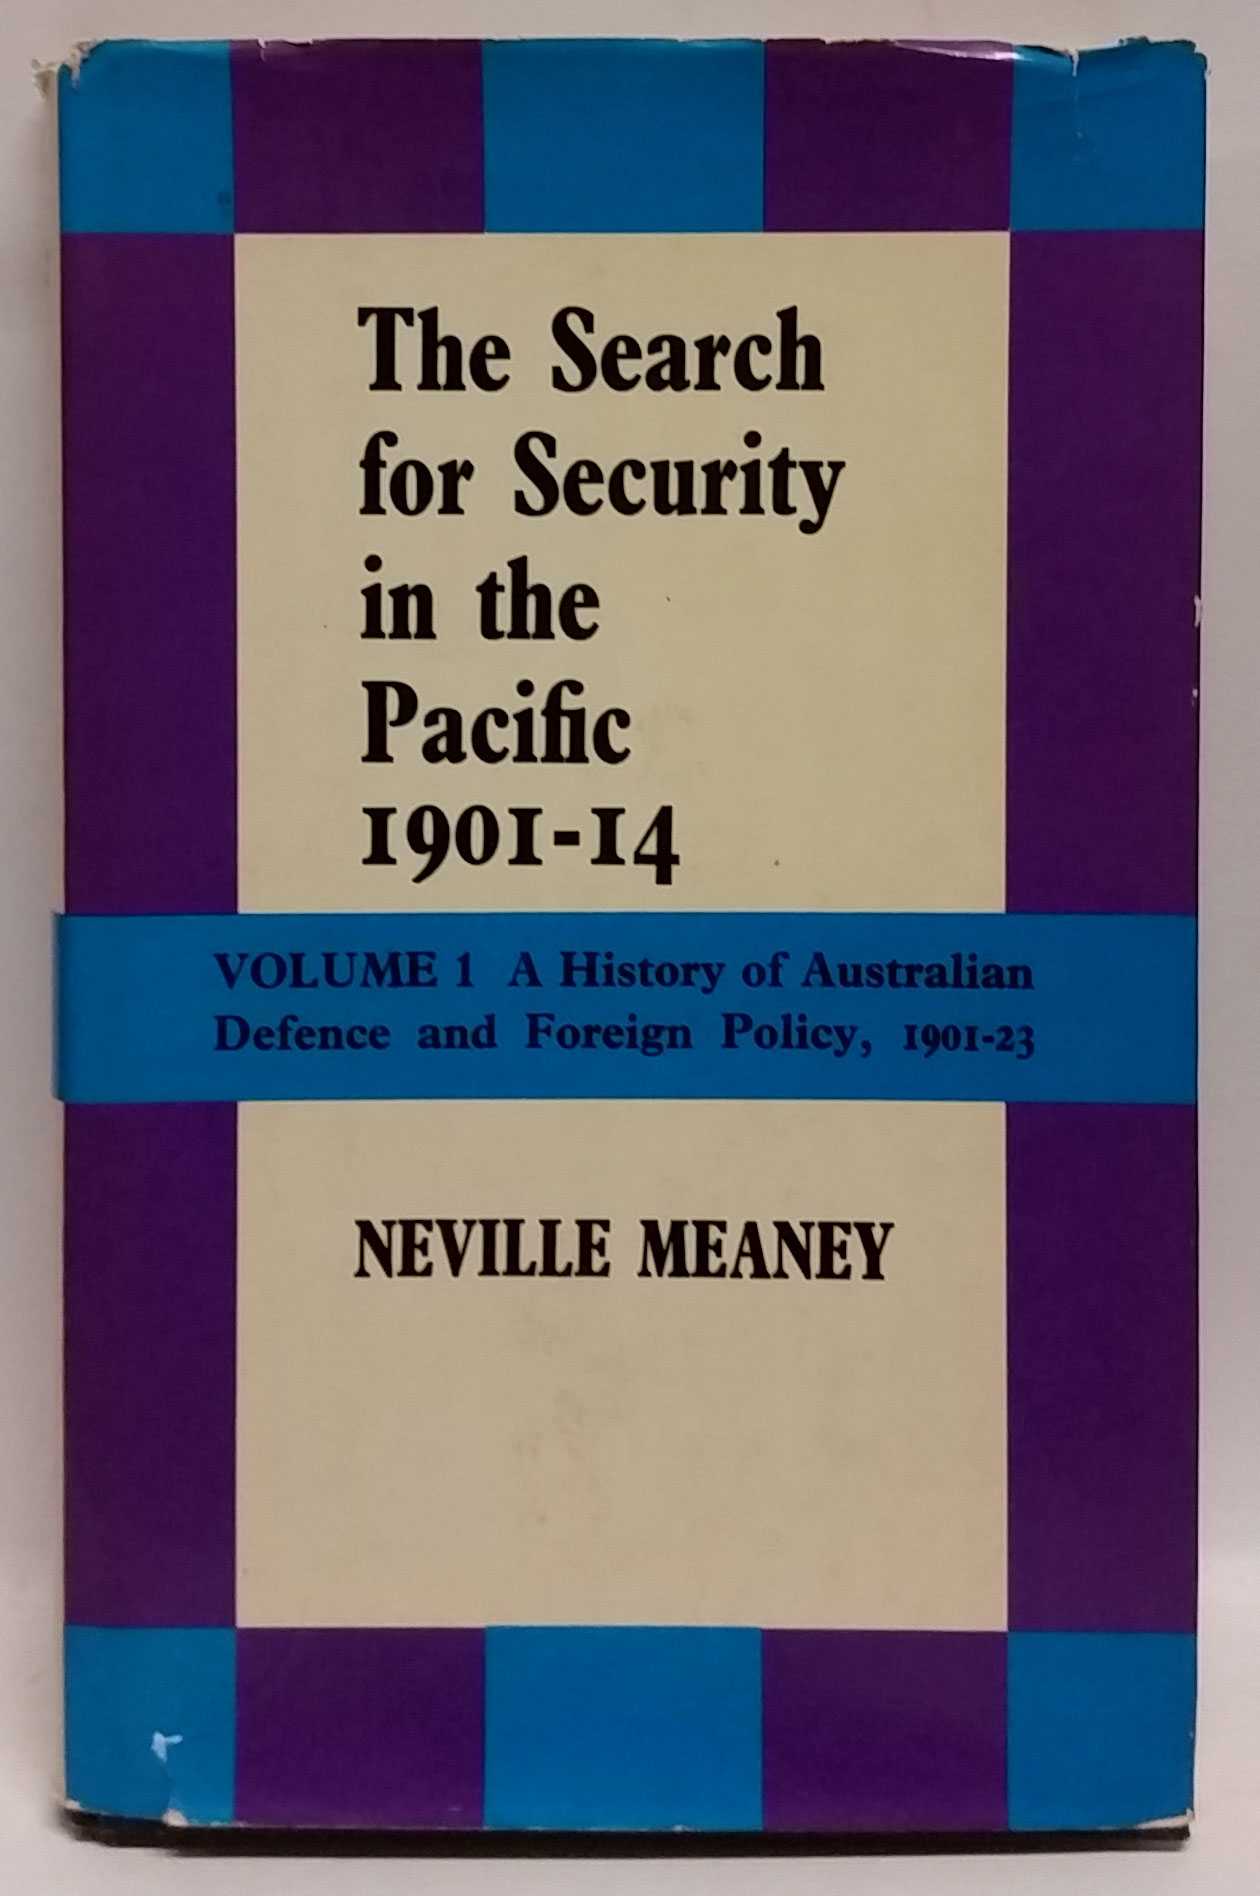 Neville Meaney - The Search for Security in the Pacific, 1901-14: Volume 1: A History of Australian Defence and Foreign Policy, 1901-23